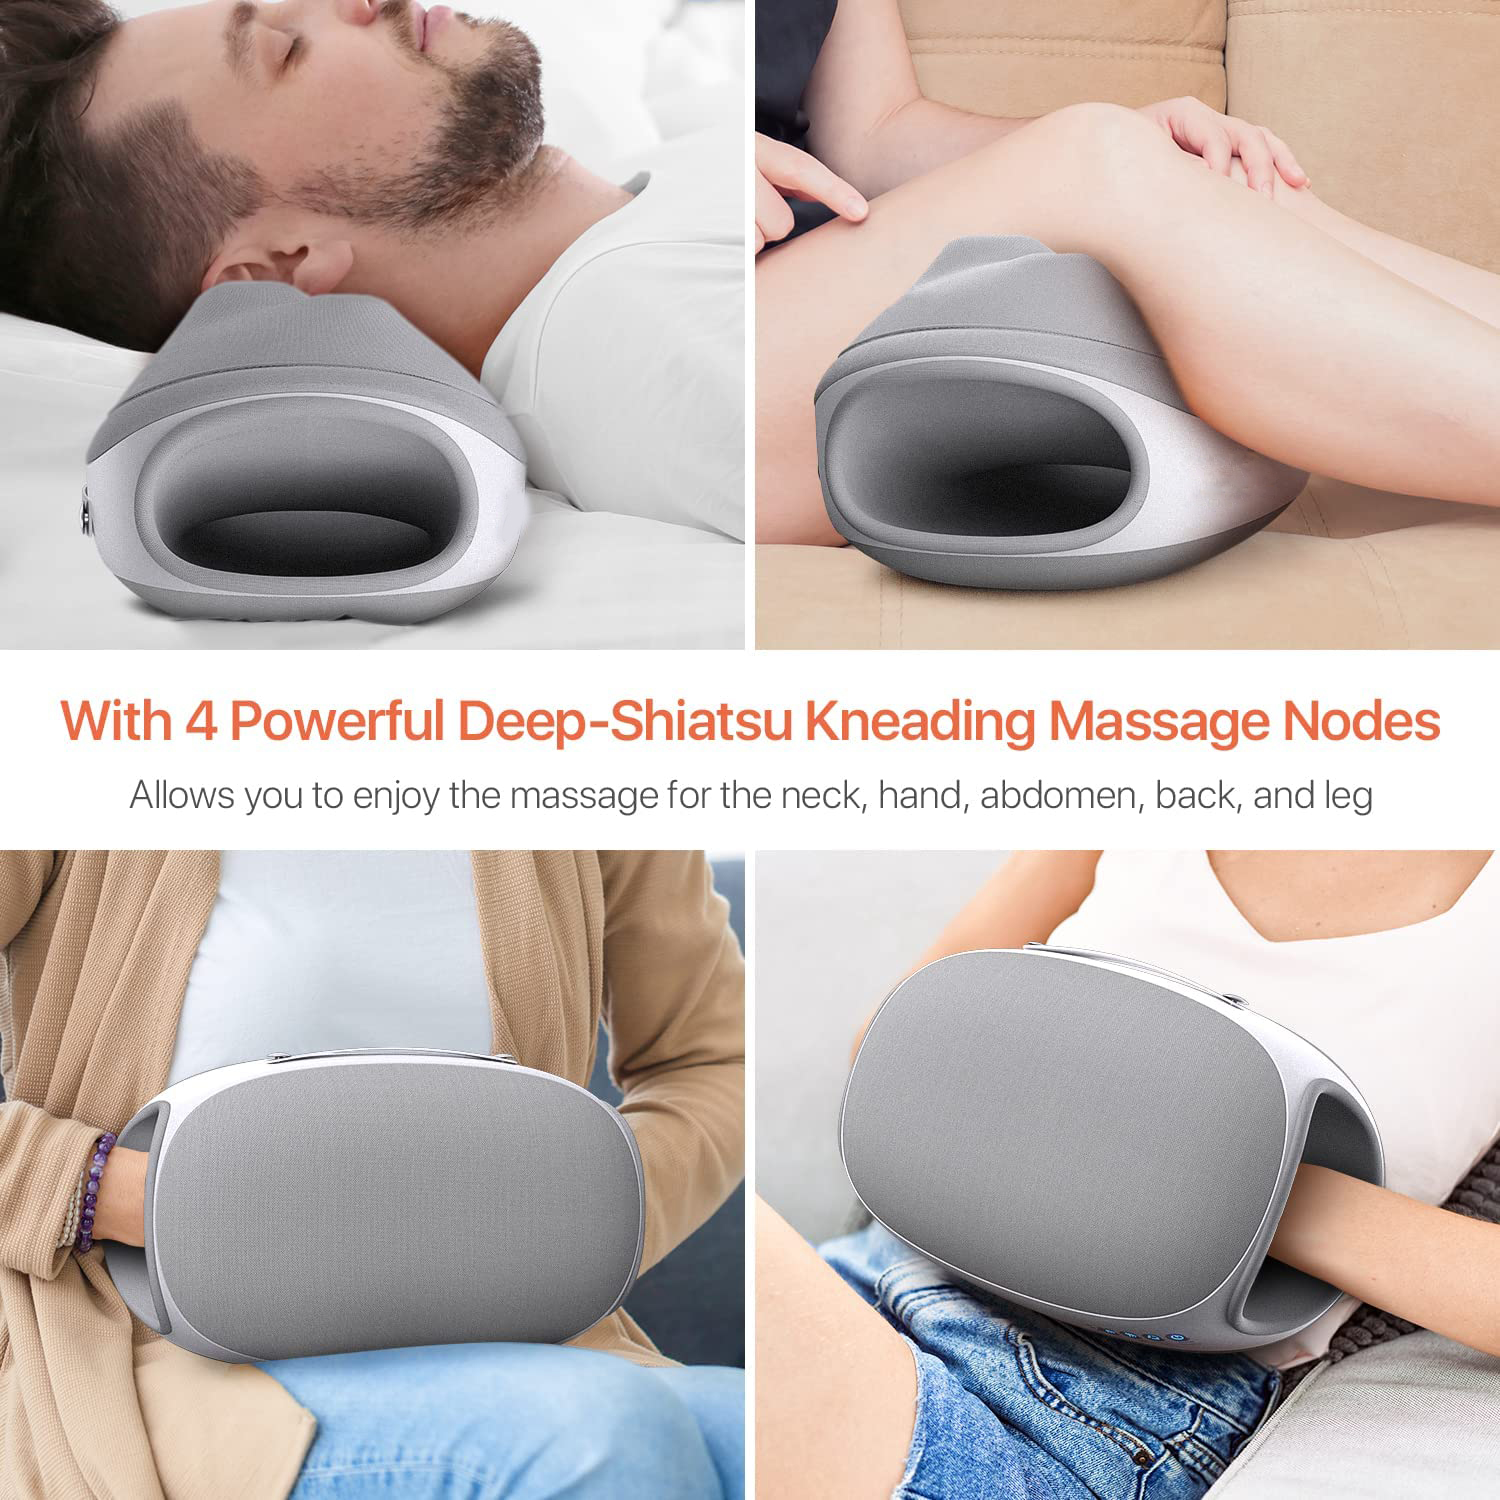 Best Sell Pillow Massager Abdominal Pain Relief Multi Hand Health Care Massage Design With Heating Menstrual Cramps Relief Period